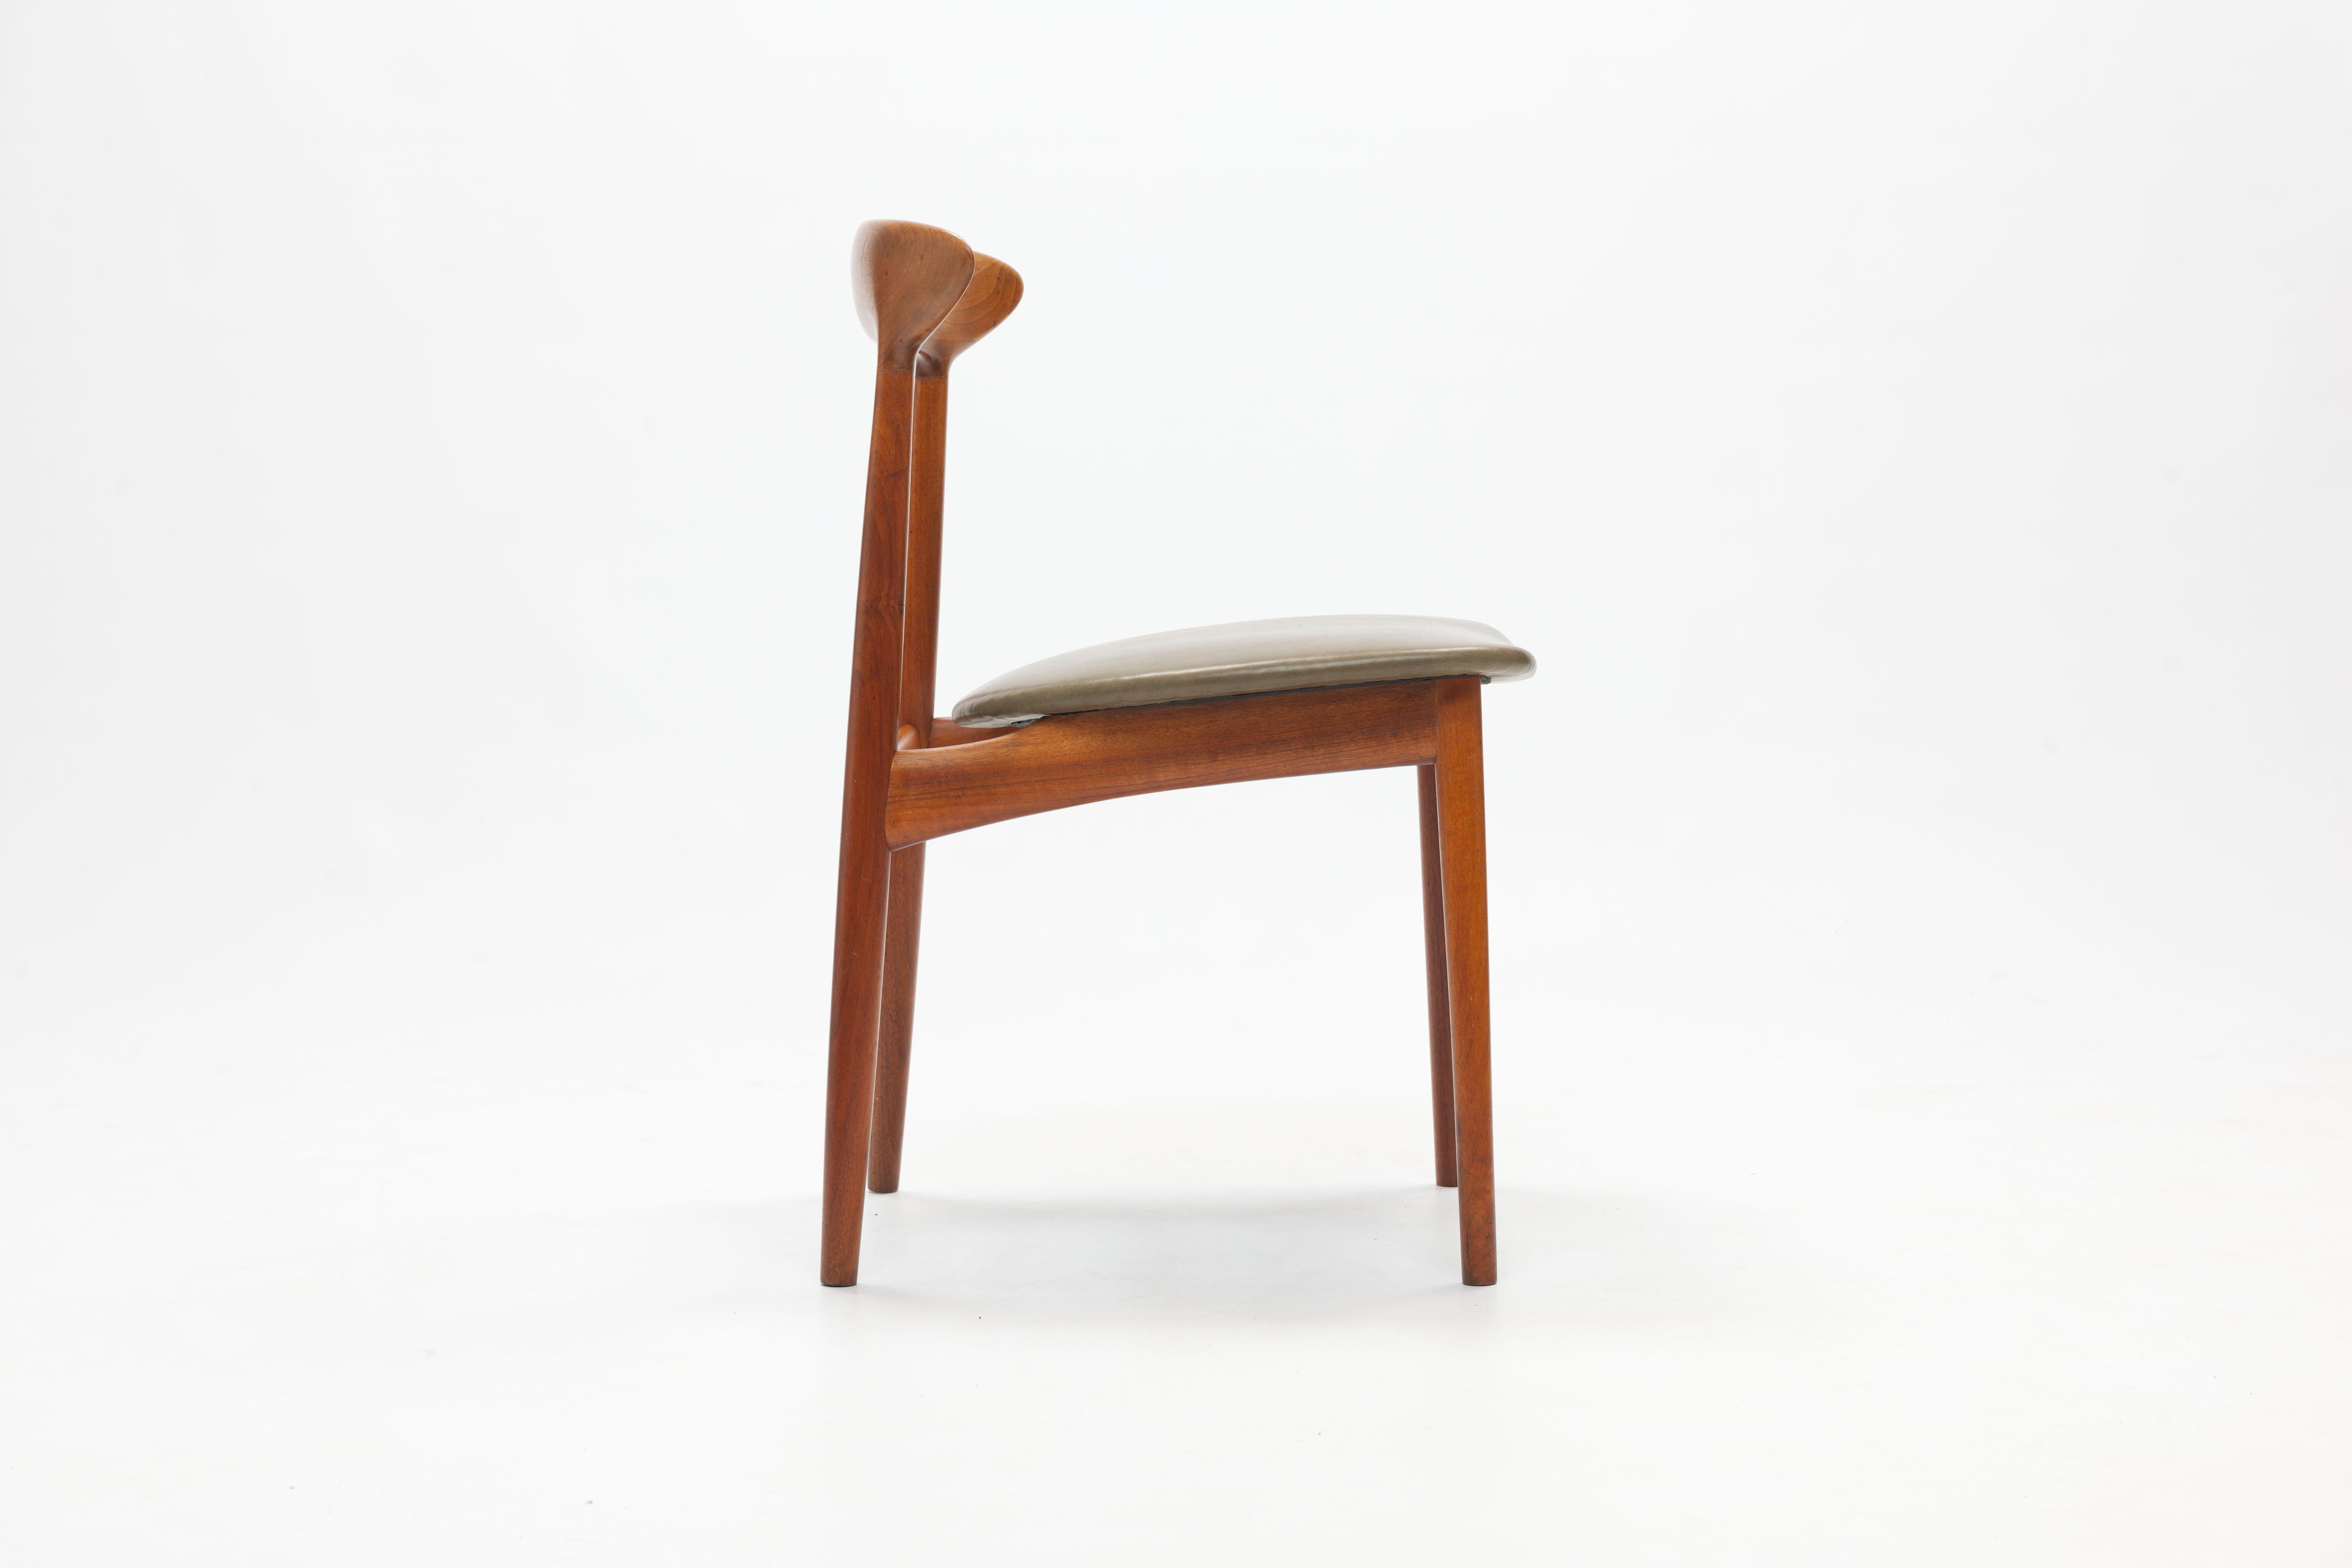 Mid-20th Century Danish Teak Chair by Kurt Østervig with Wooden Inlay Back Support